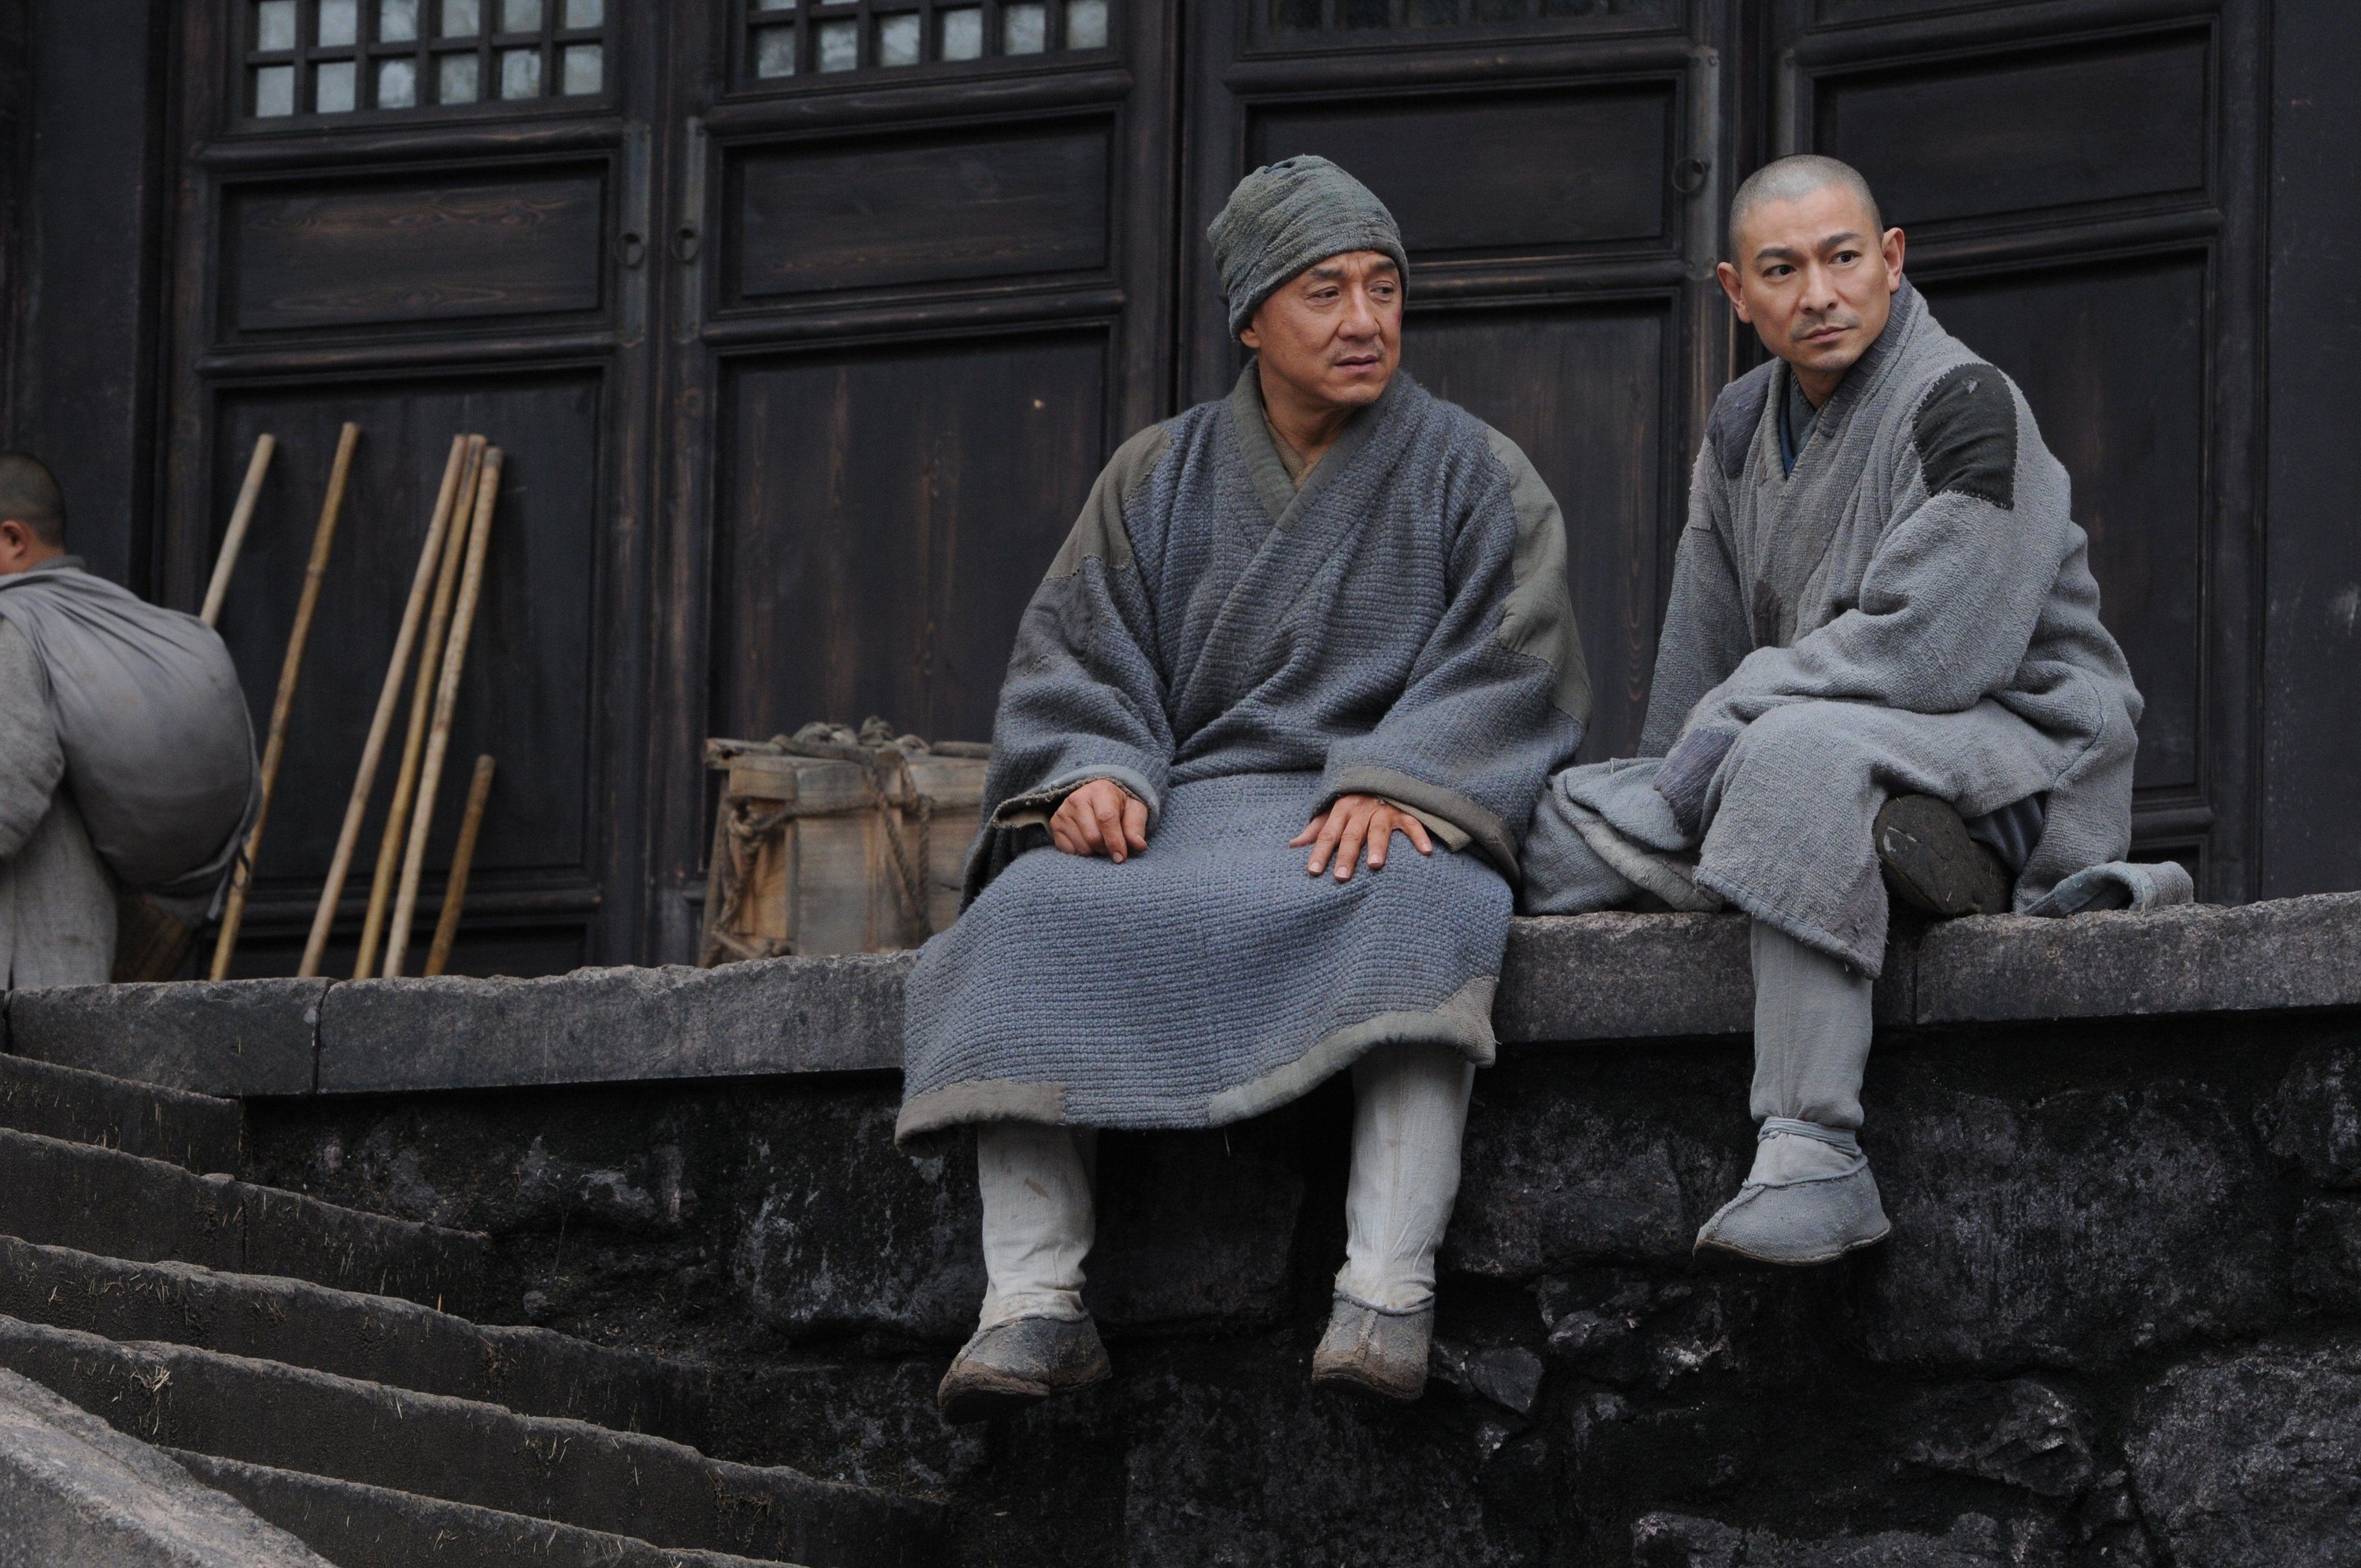 Jackie Chan and Andy Lau&#x27;s characters sitting together